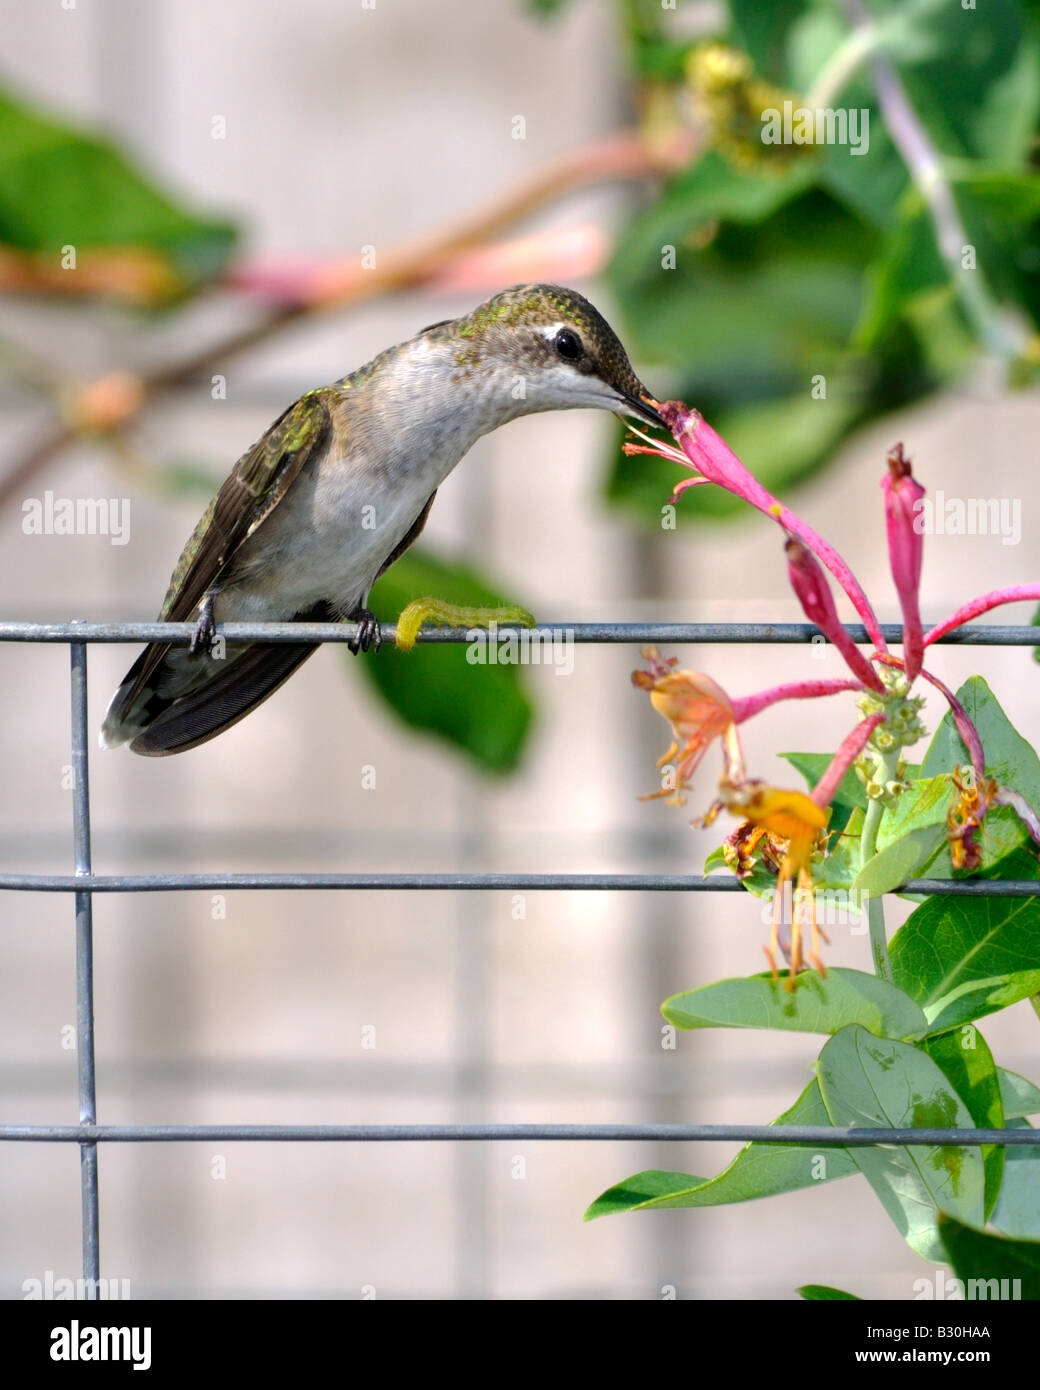 A female Ruby throated Hummingbird Archilochus colubris perches on a wire trellis and feeds from honeysuckle, Lonicera heckrottii. Oklahoma, USA. Stock Photo